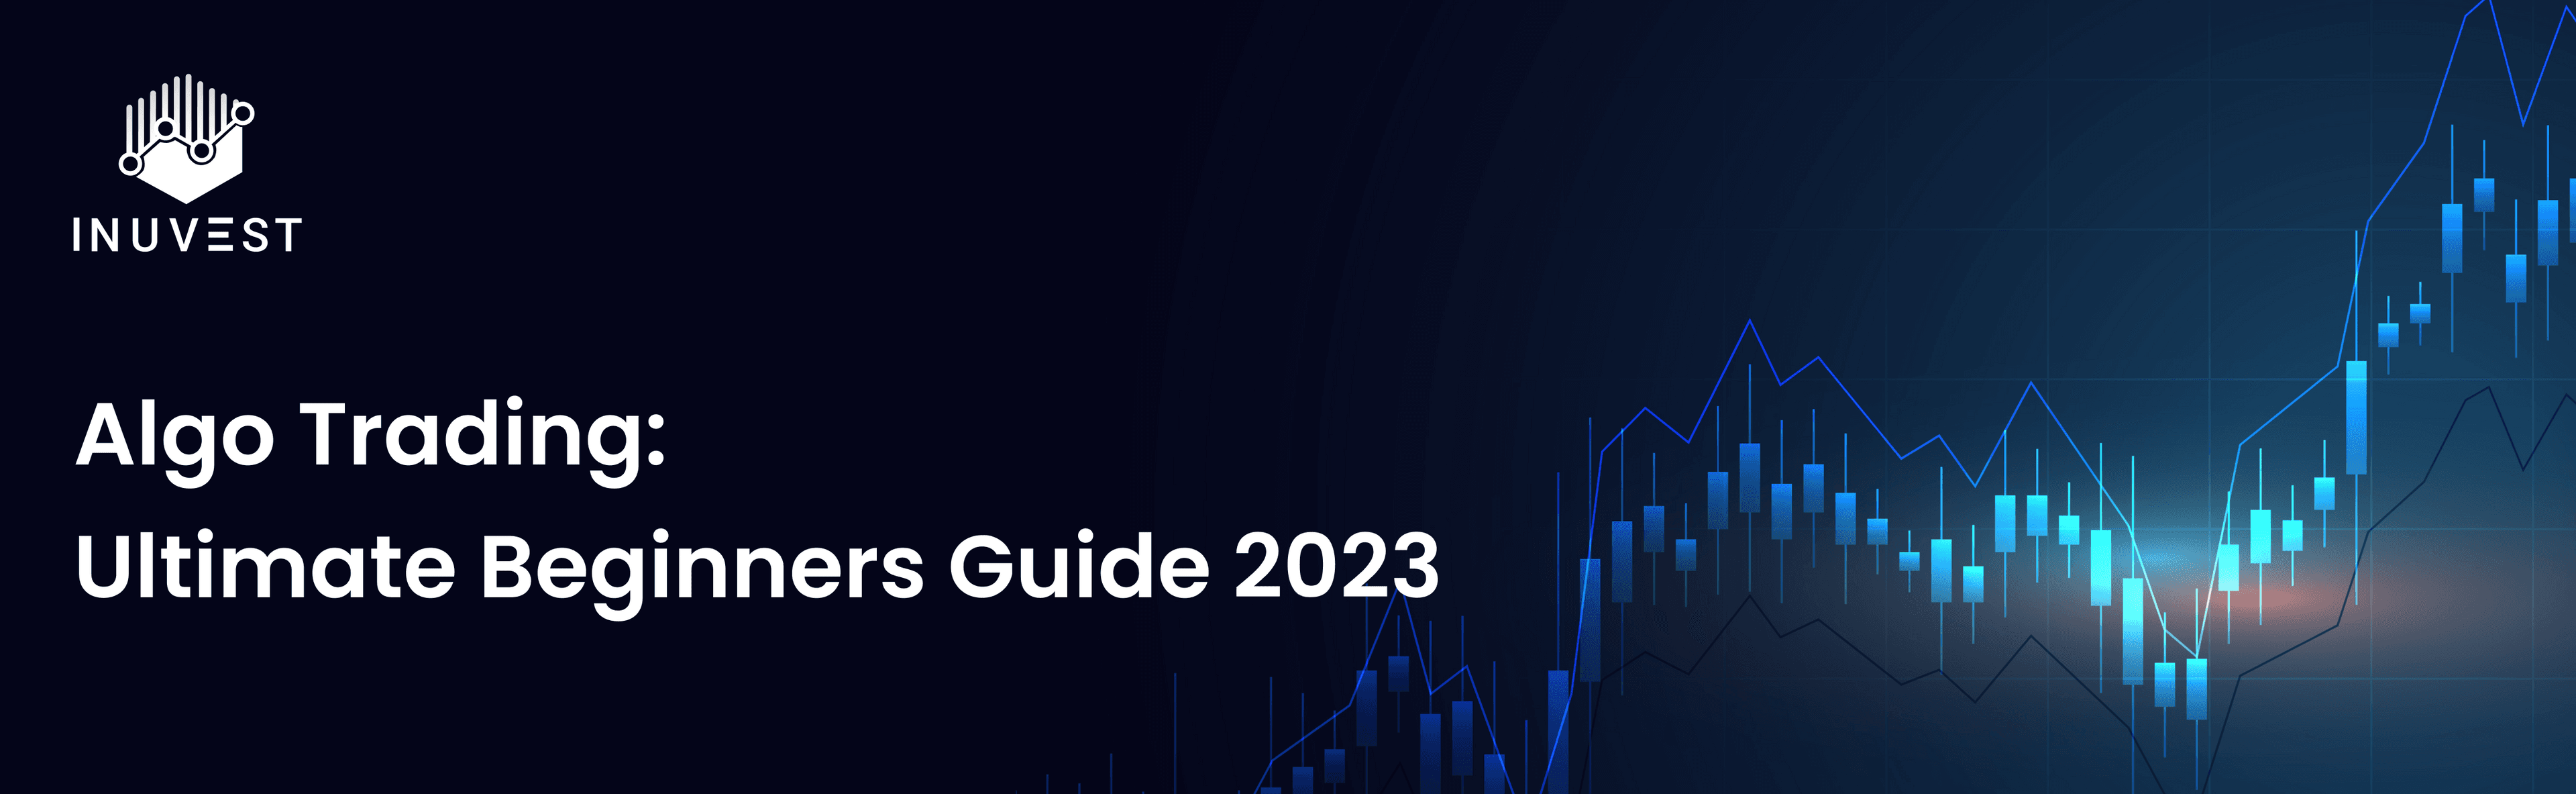 Algo Trading: Ultimate Beginners Guide 2023